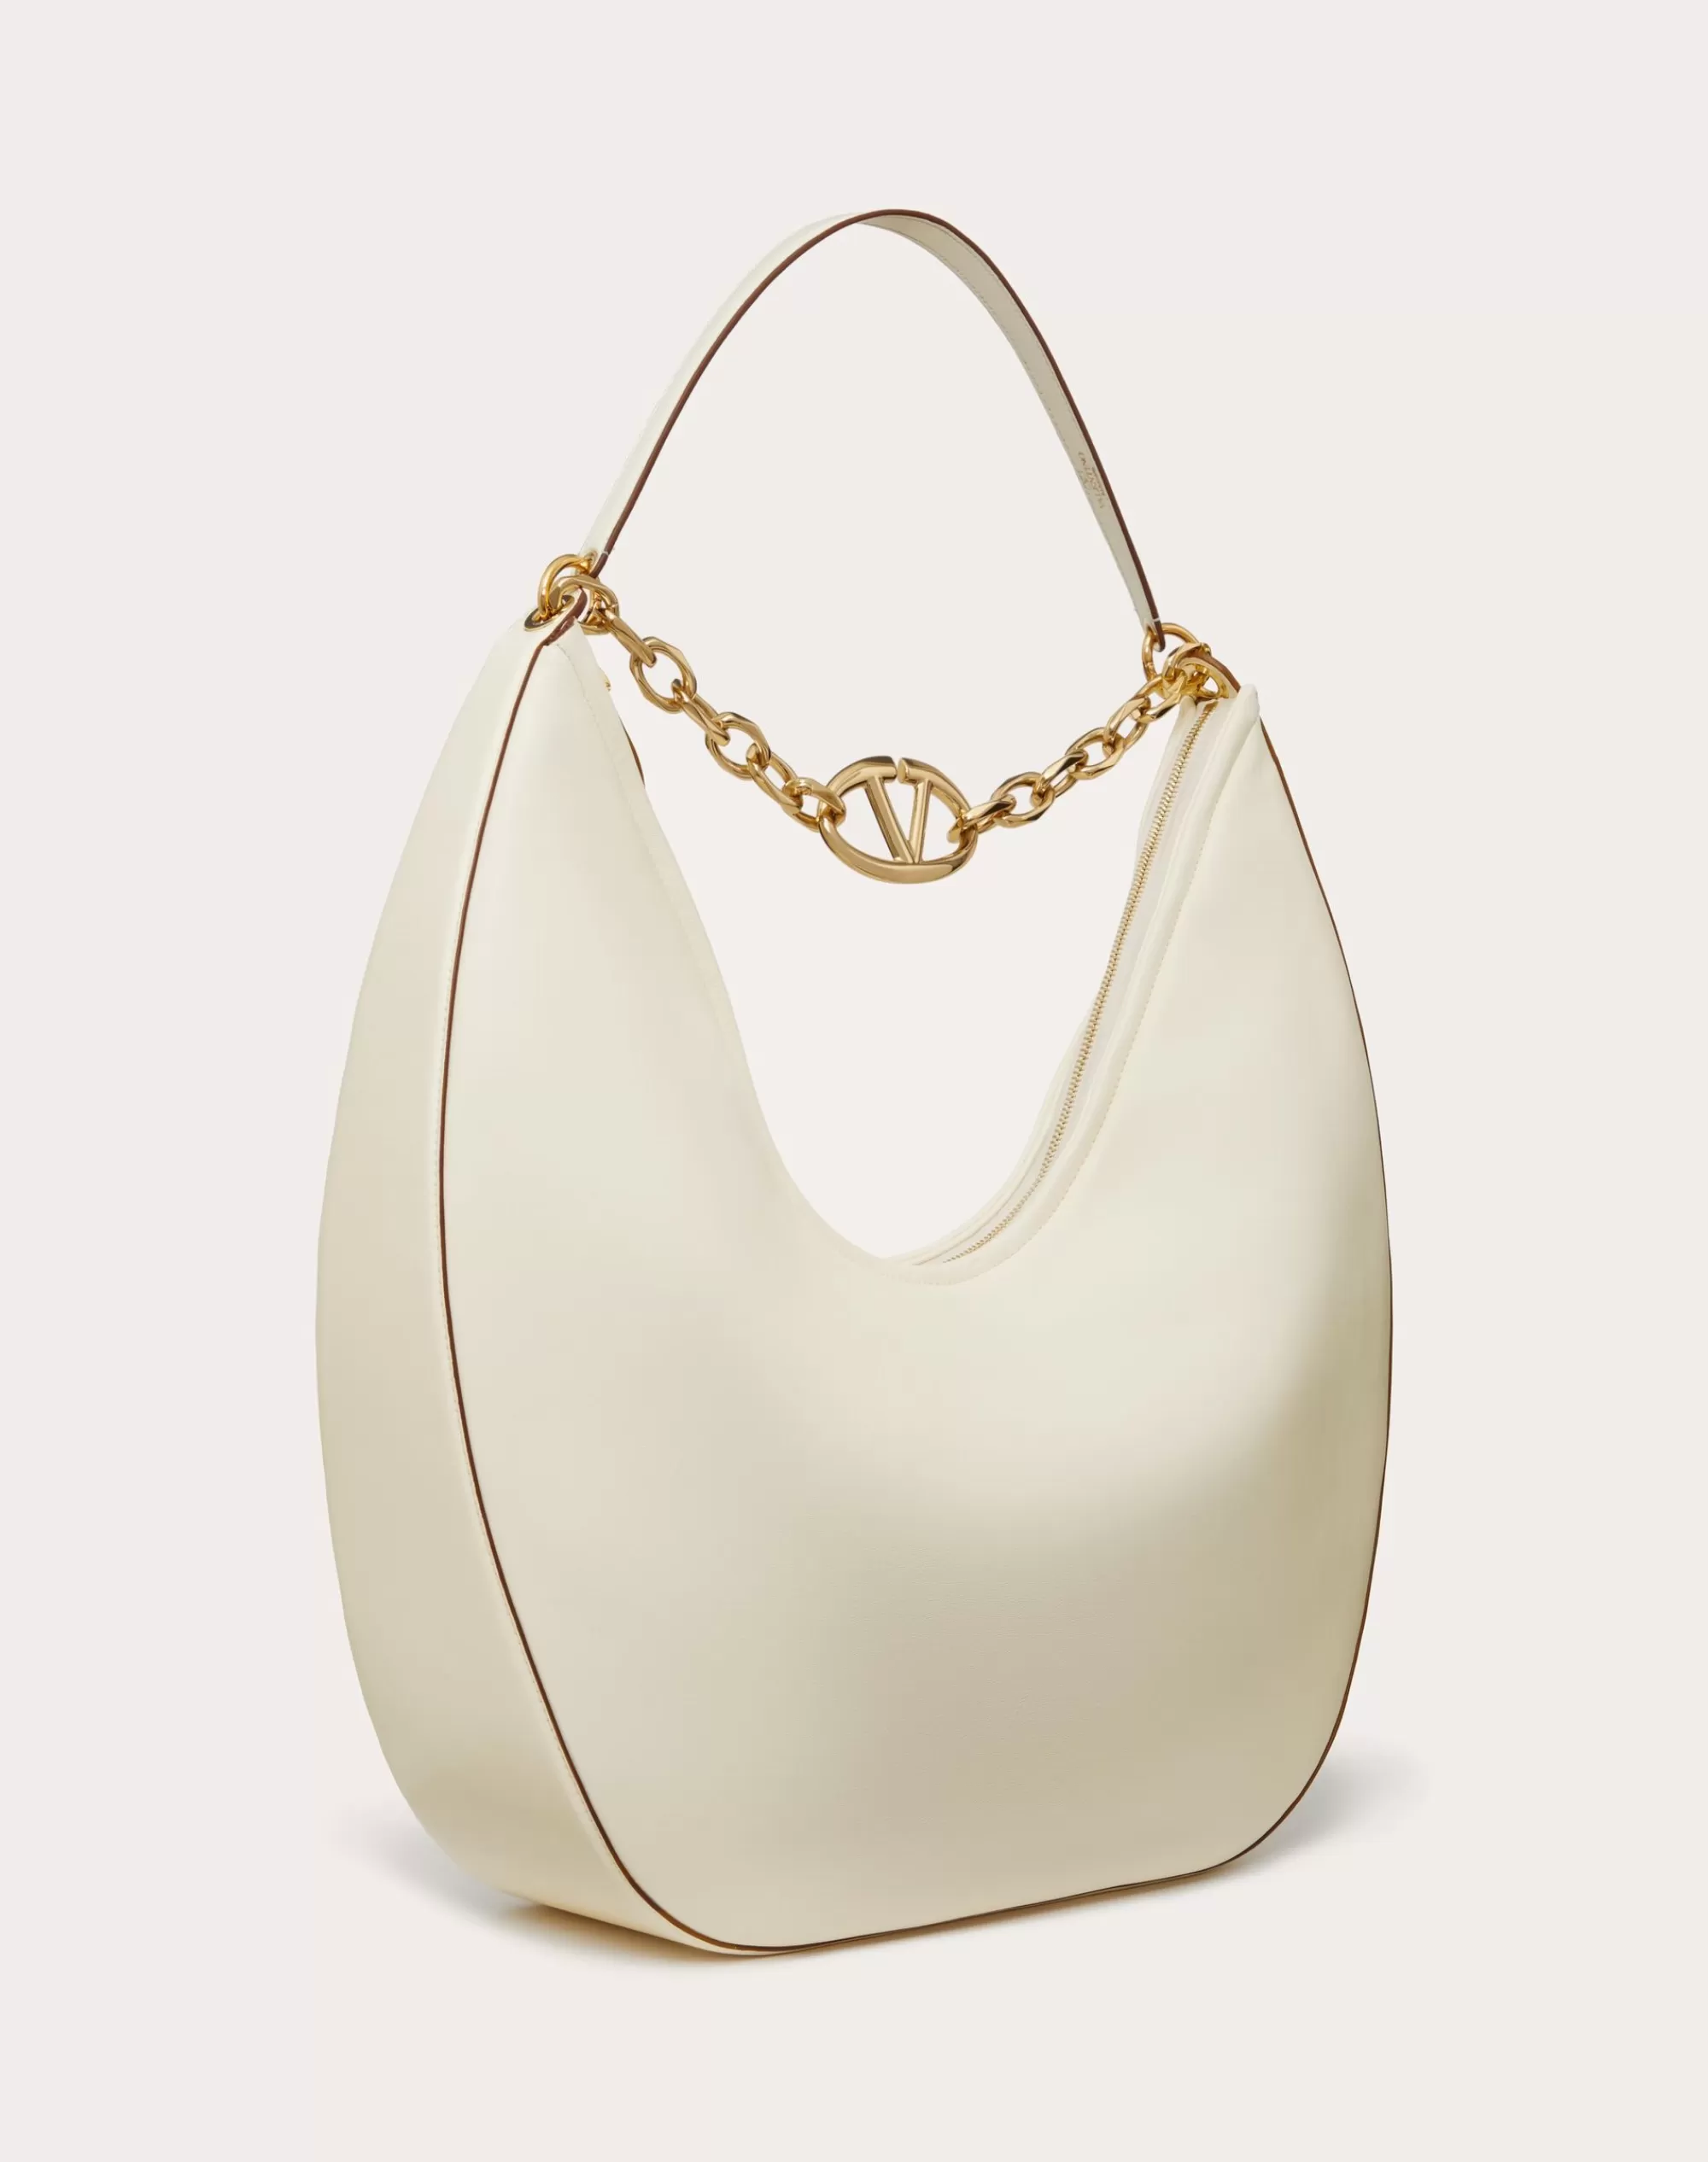 Valentino MAXI VLOGO MOON NAPPA LEATHER HOBO BAG WITH CHAIN Best Sale